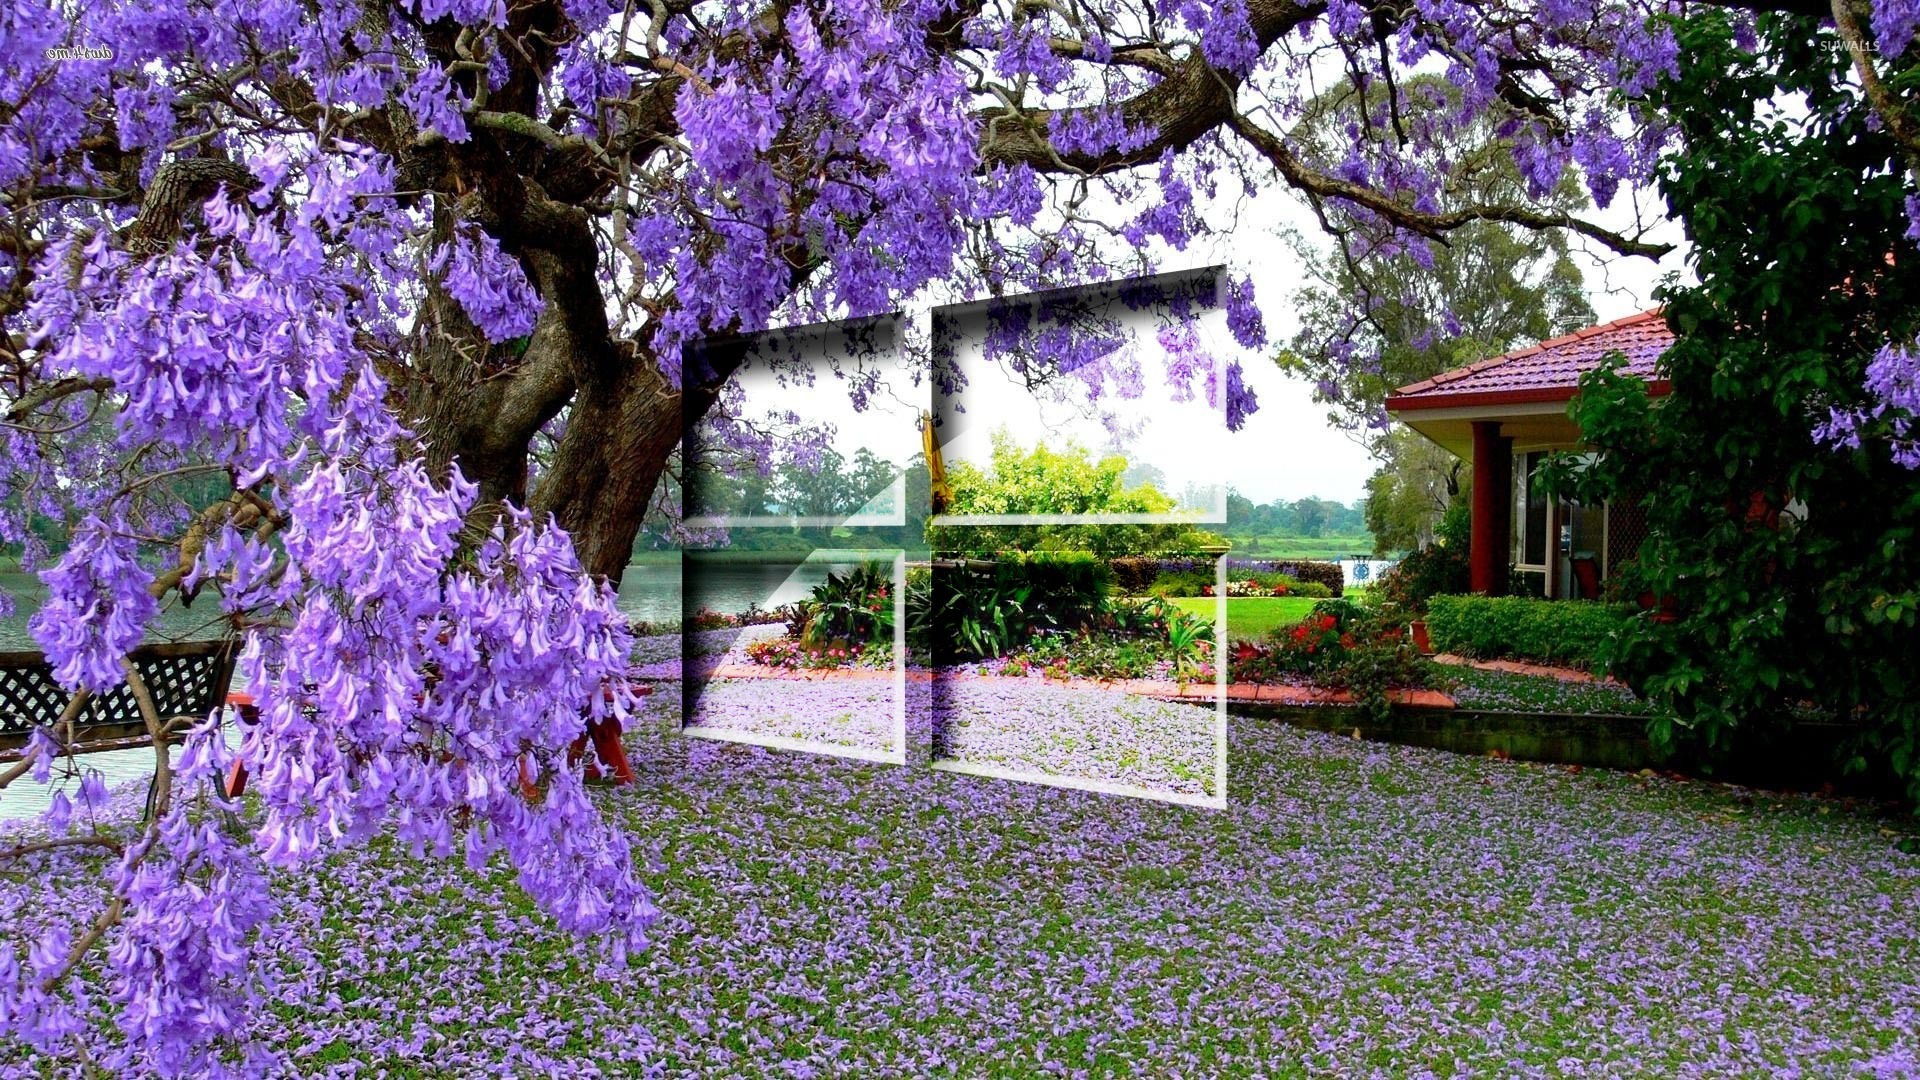 Windows 10 on the purple blossoms wallpaper   Computer wallpapers